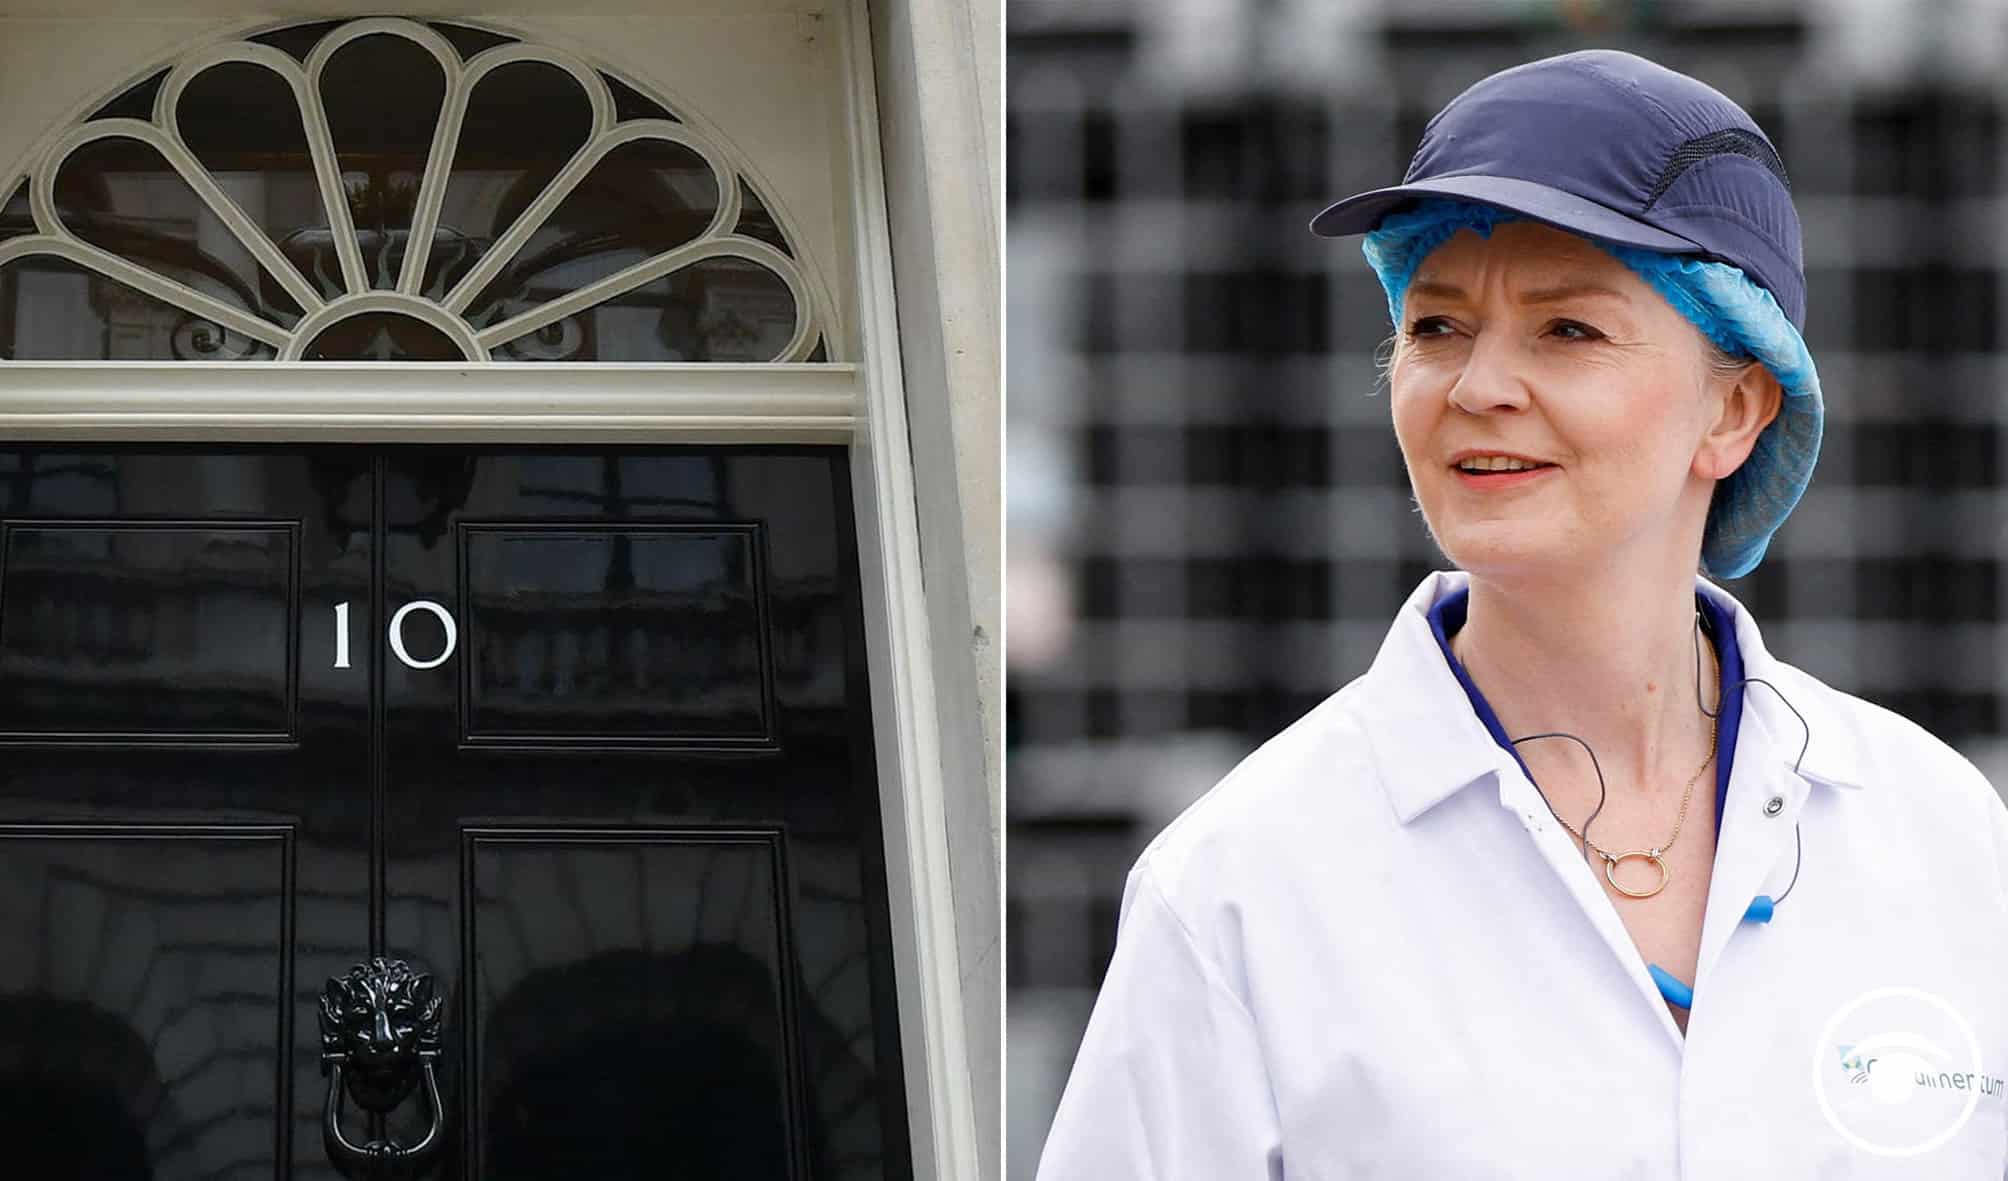 Workers urged to ‘unite and stand against’ Liz Truss’s bonfire of workers’ rights